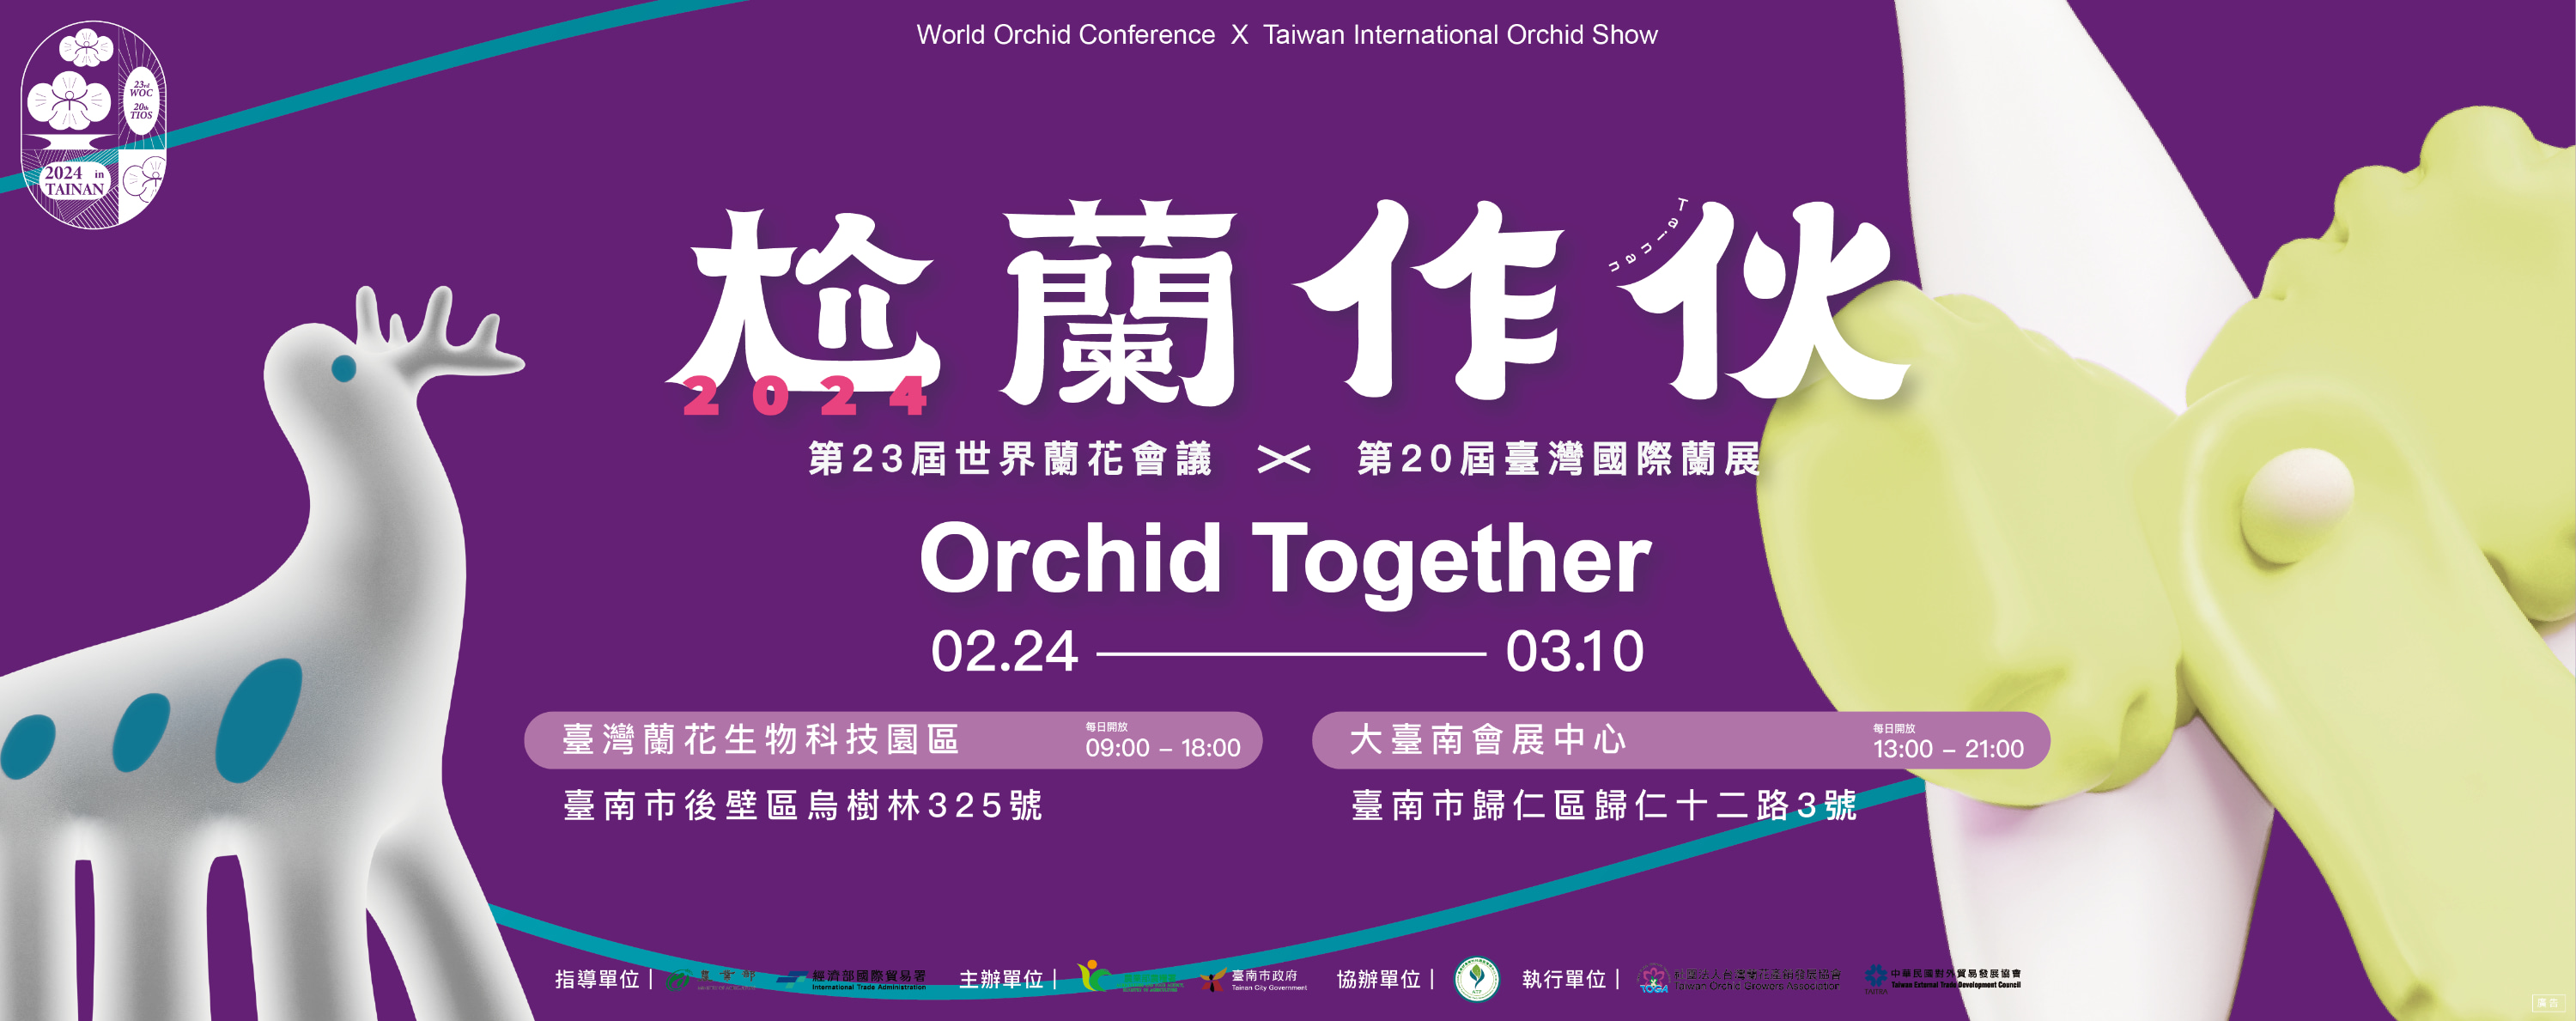 The 23rd World Orchid Conference and the 20th Taiwan International Orchid Exhibition